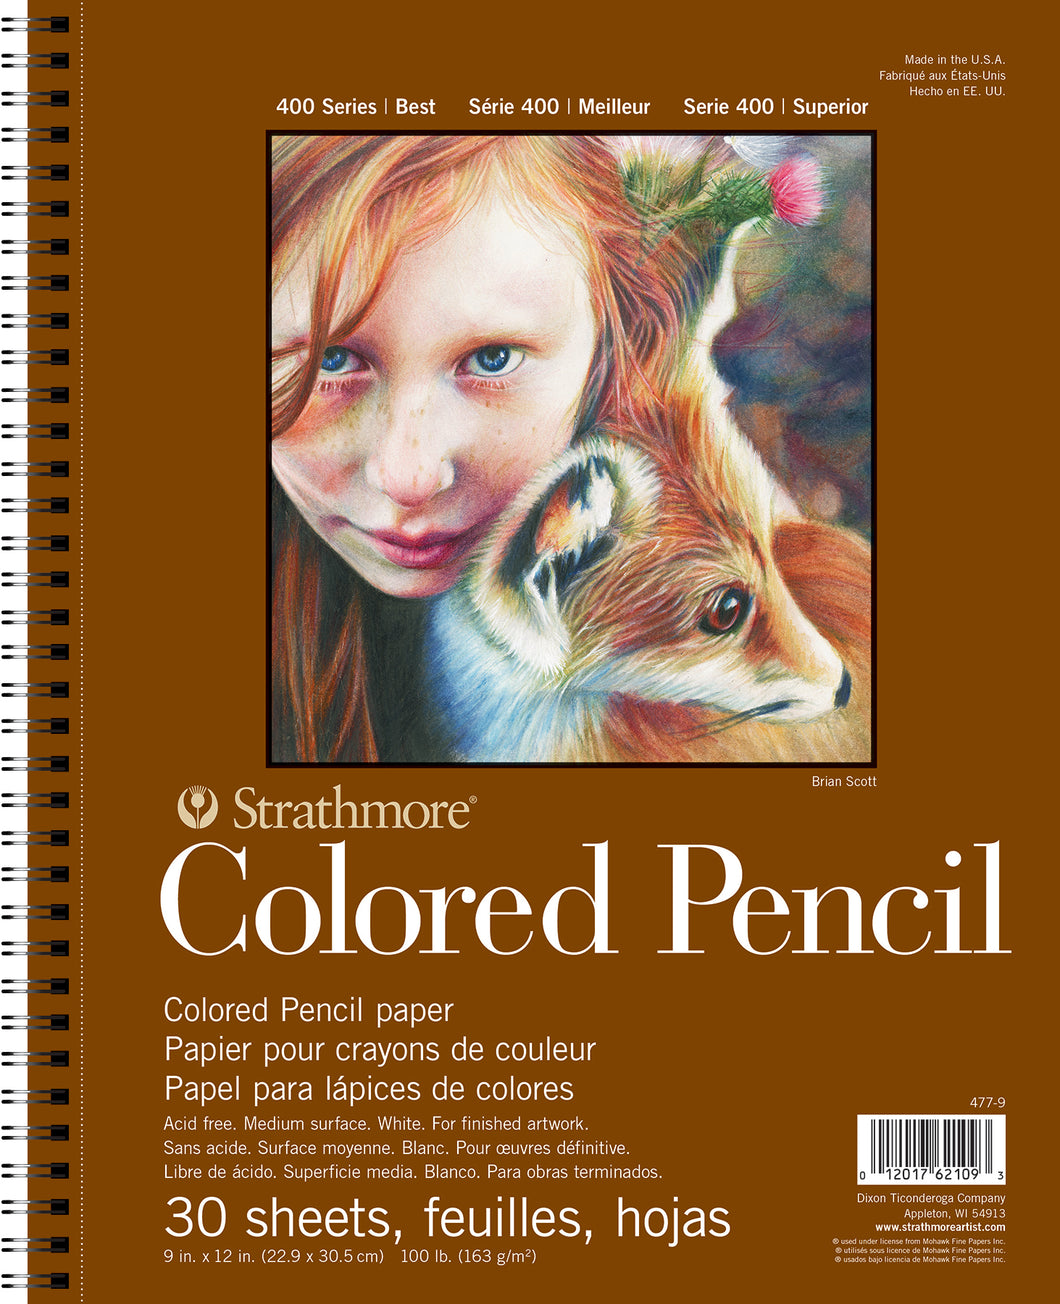 Strathmore - Colored Pencil Pads 400 Series, 9